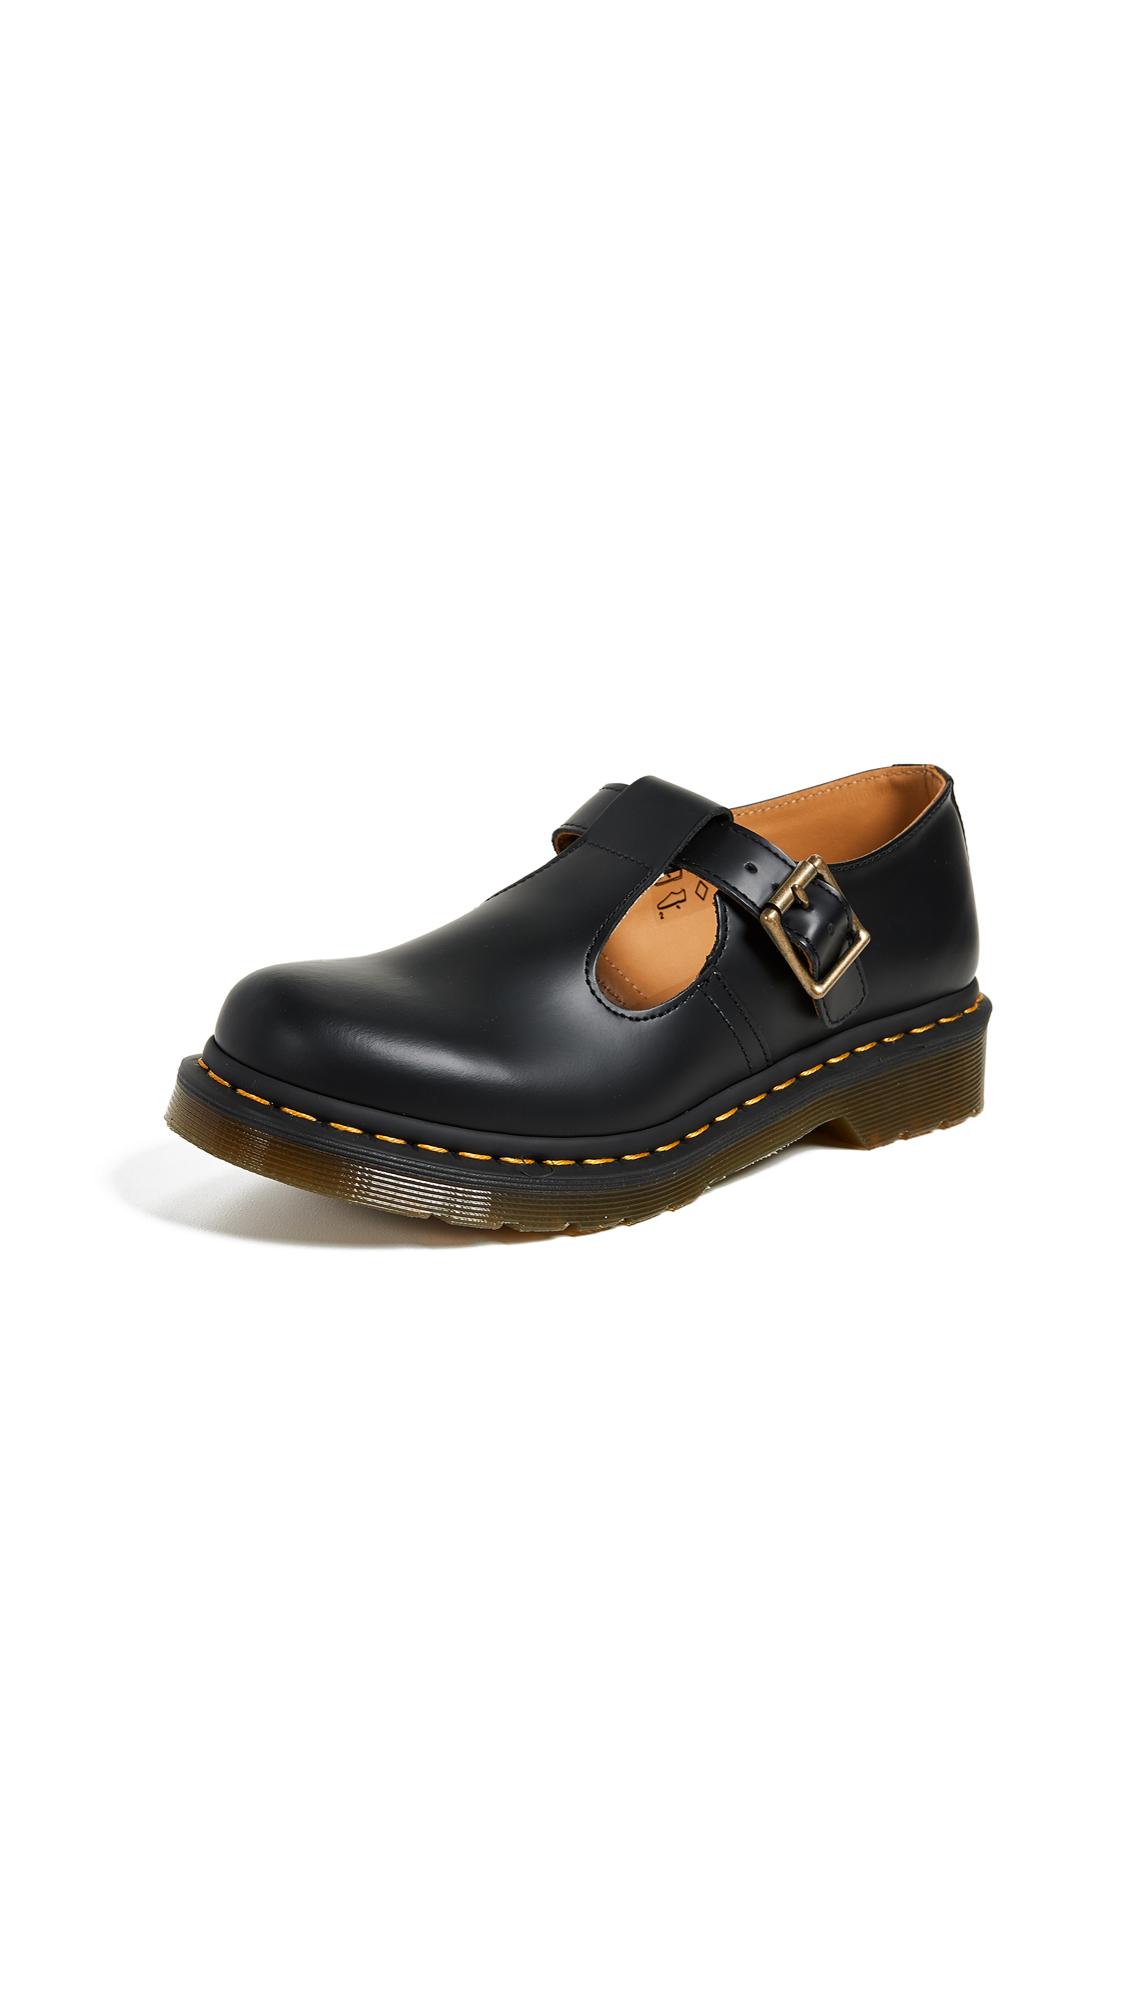 Dr. Martens Leather Polley T-bar Mary Jane Shoes in Black | Lyst